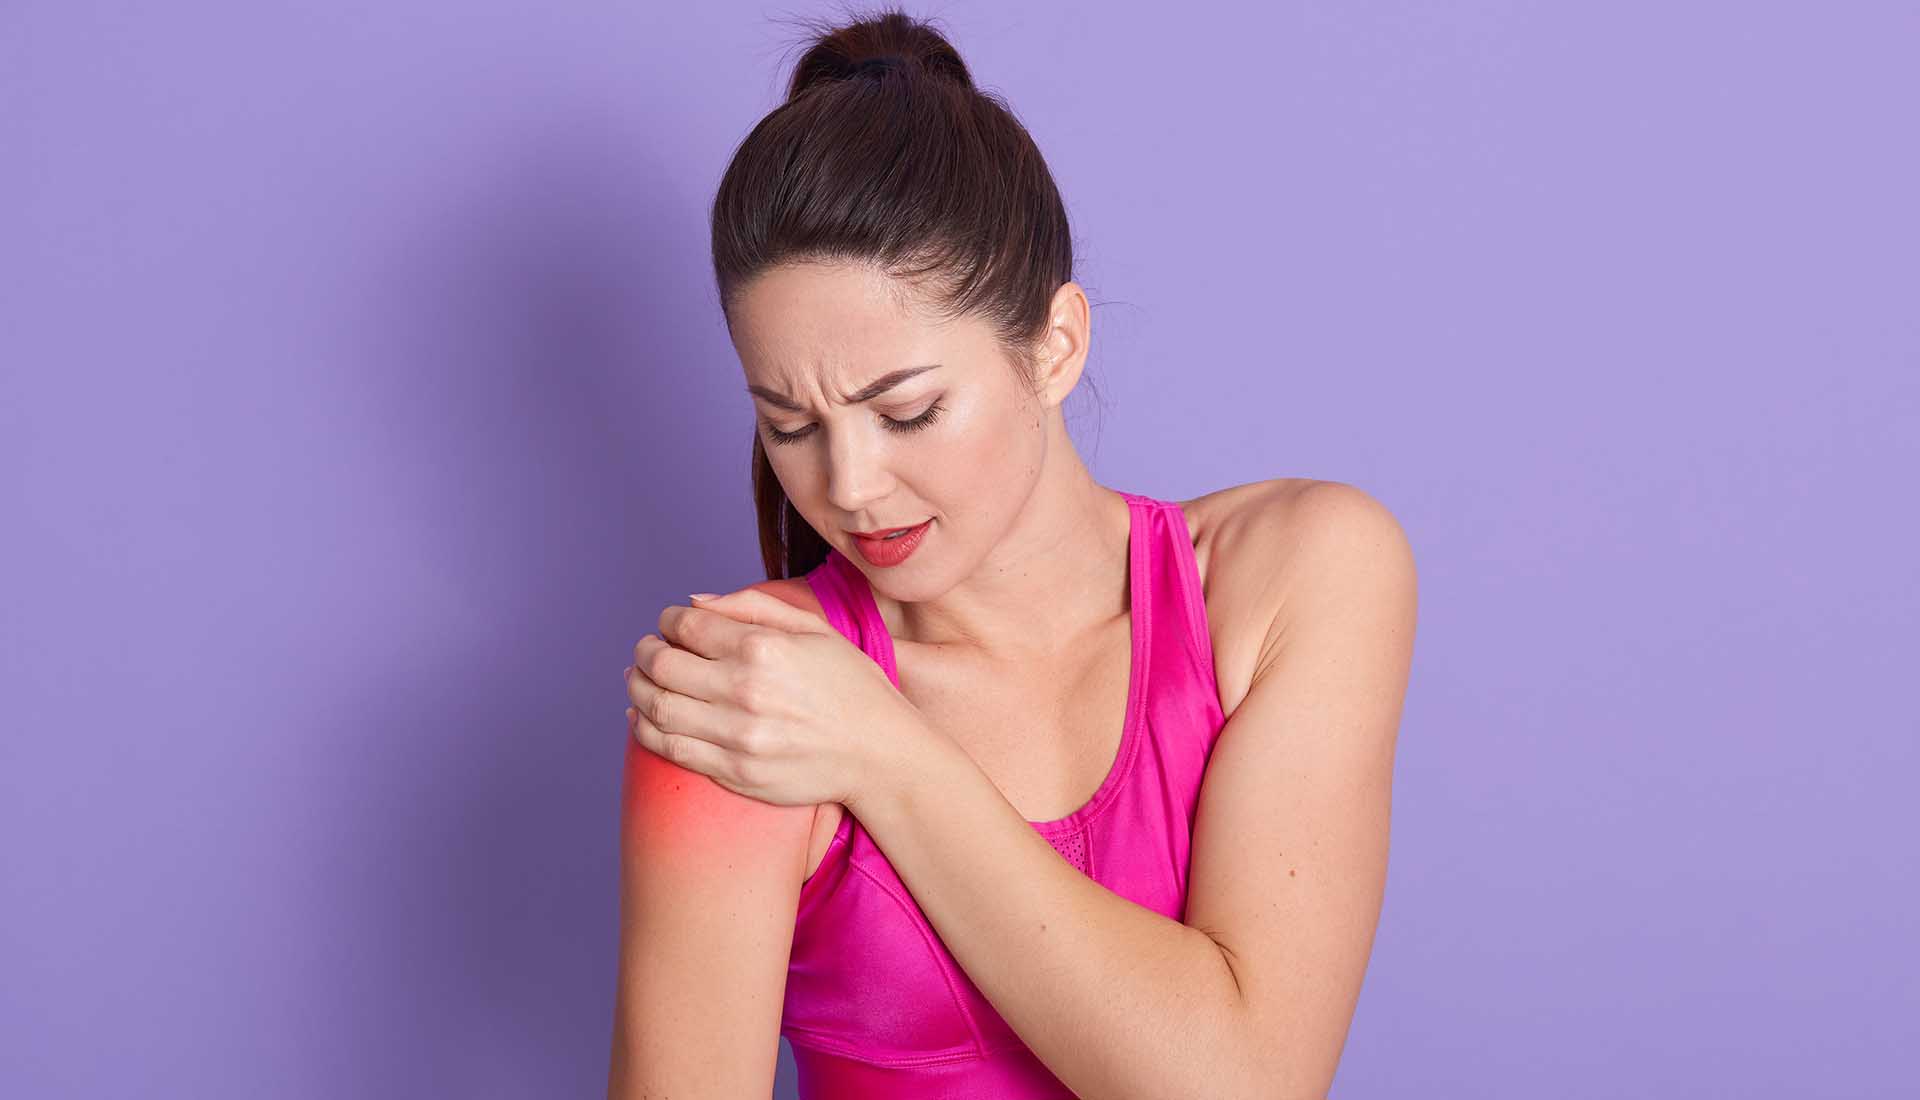 Portrait of sporty woman putting her hand on injury shoulder.